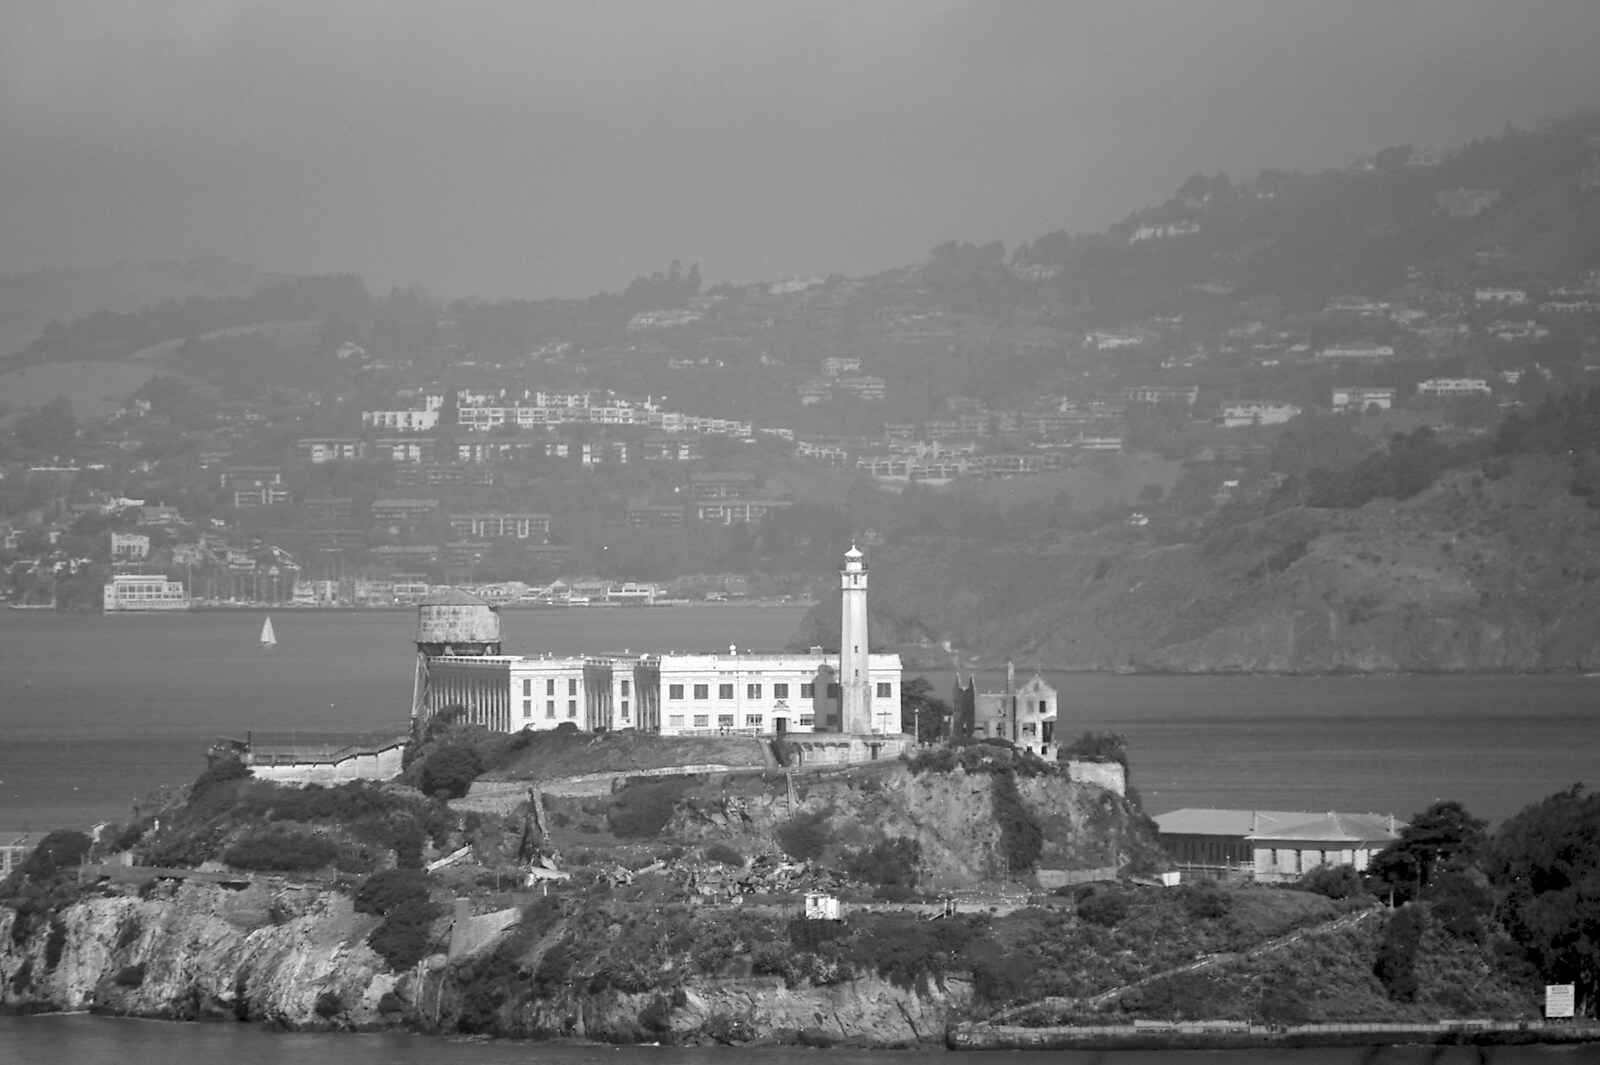 Alcatraz island and the prison from Chinatown, Telegraph Hill and Fisherman's Wharf, San Francisco, California, US - 11th March 2006